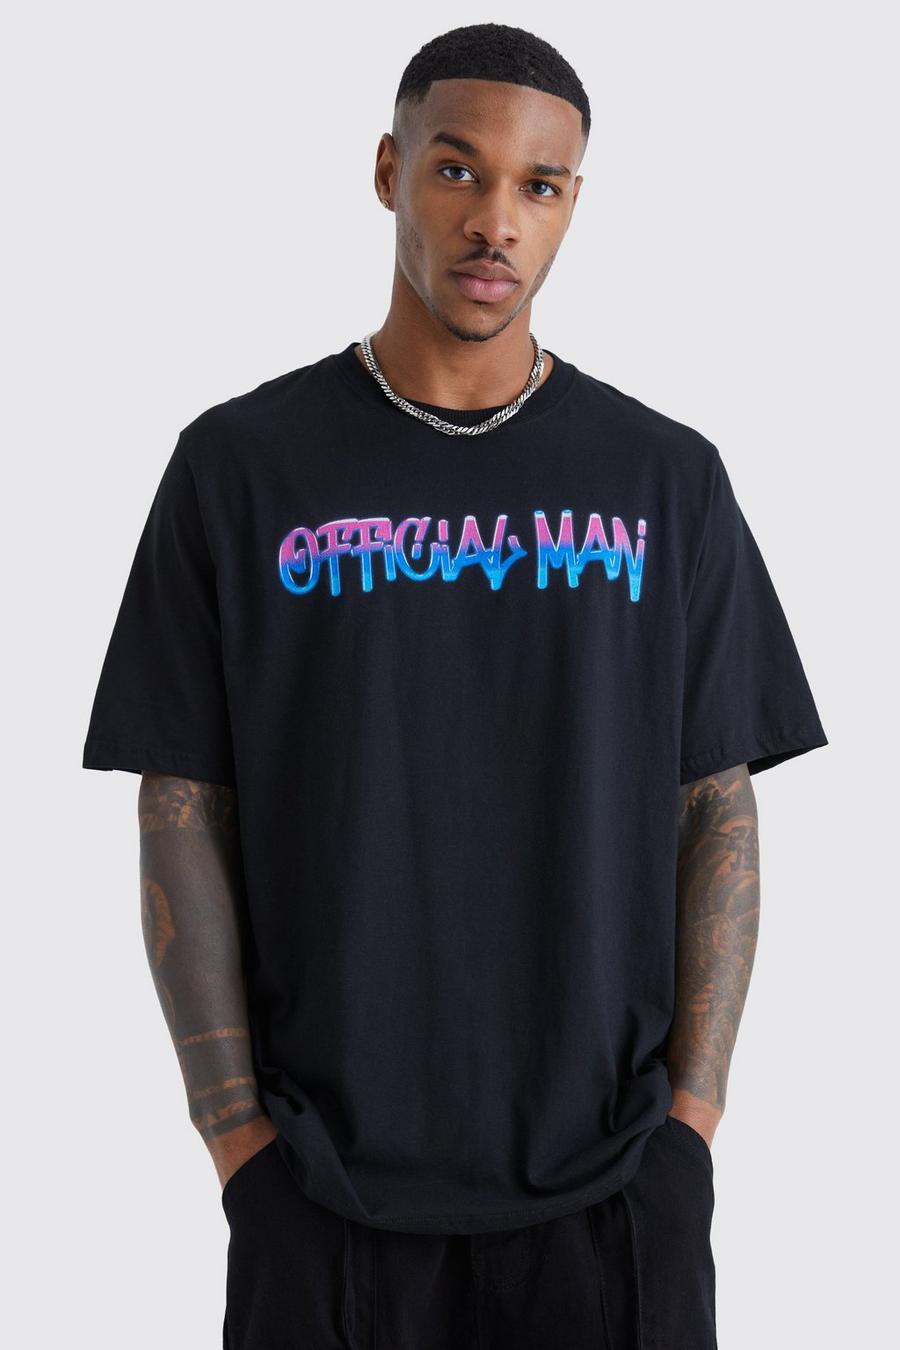 Black Oversized Ombre Official Man Print T-shirt